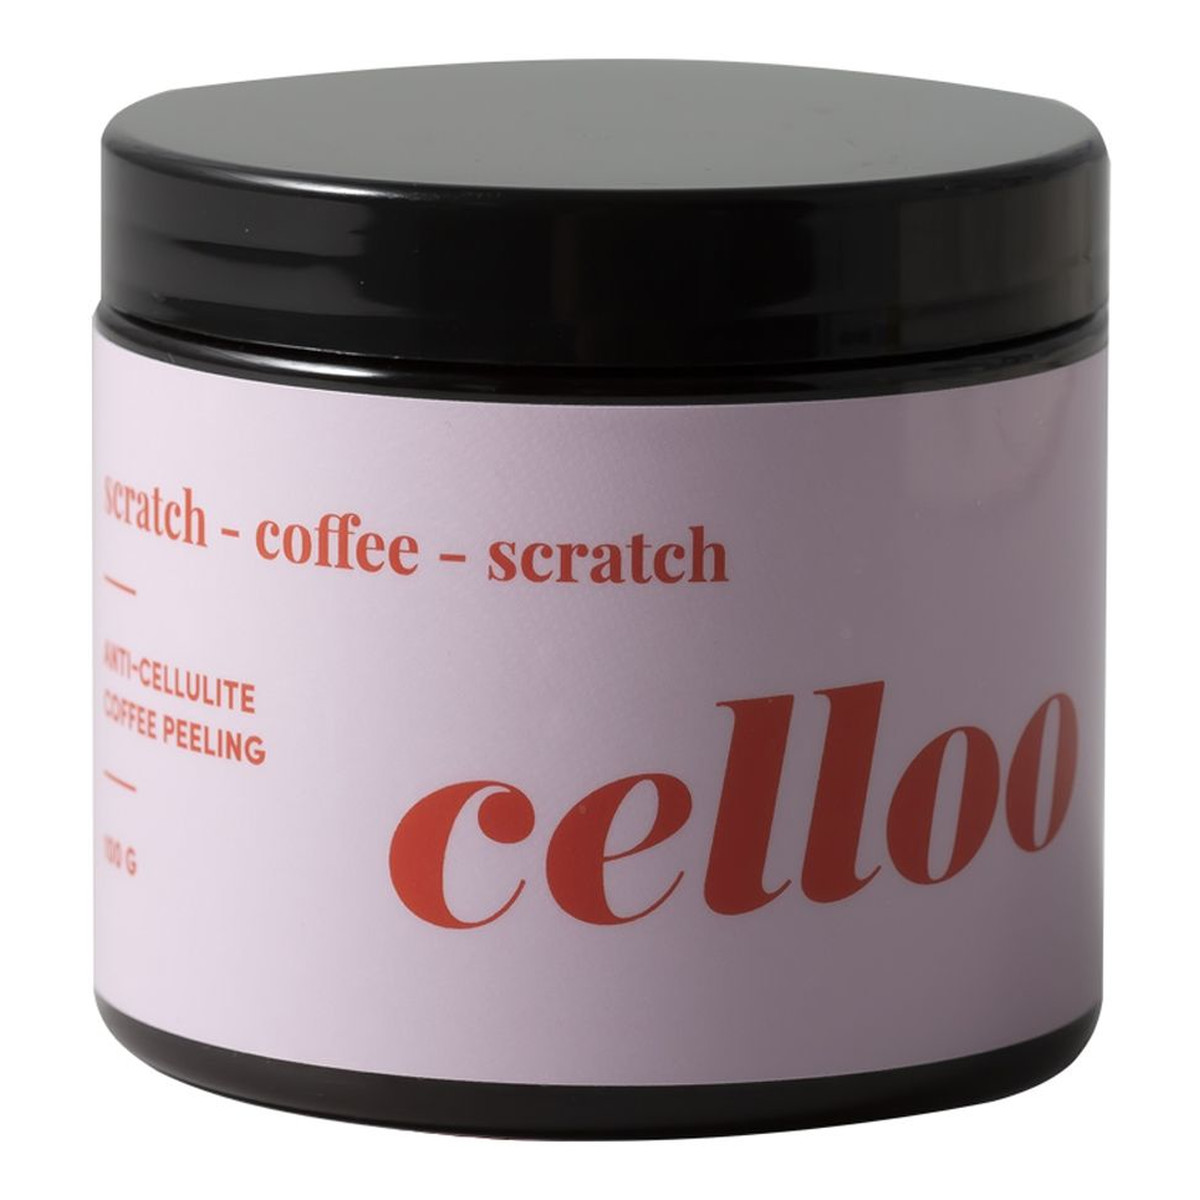 Celloo Scratch-coffee-scratch kawowy peeling antycellulitowy 100g